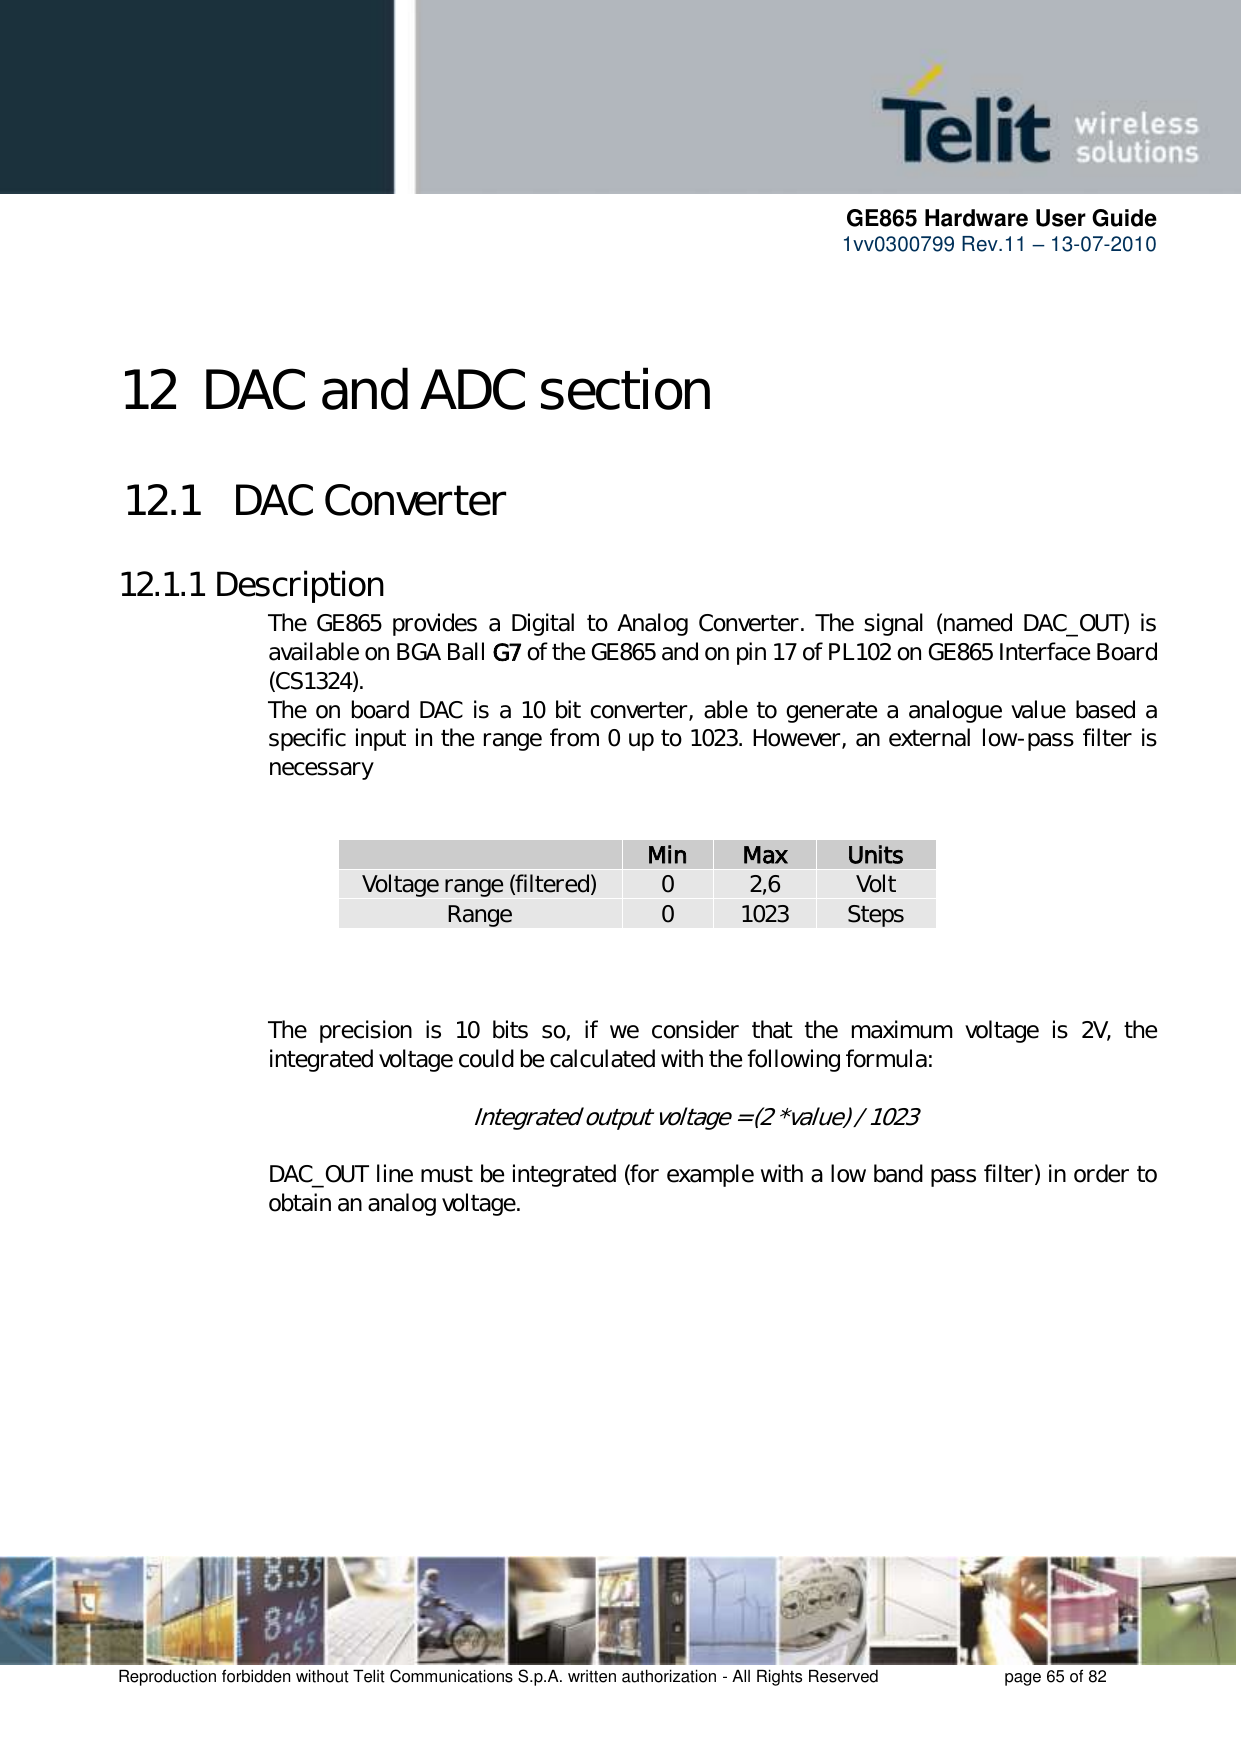      GE865 Hardware User Guide 1vv0300799 Rev.11 – 13-07-2010       Reproduction forbidden without Telit Communications S.p.A. written authorization - All Rights Reserved    page 65 of 82  12 DAC and ADC section 12.1   DAC Converter 12.1.1 Description The GE865  provides a Digital to  Analog Converter.  The signal (named DAC_OUT) is available on BGA Ball G7 of the GE865 and on pin 17 of PL102 on GE865 Interface Board  (CS1324). The on board DAC is a 10 bit converter, able to generate a analogue value based a specific input in the range from 0 up to 1023. However, an external low-pass filter is necessary    Min Max Units Voltage range (filtered) 0 2,6 Volt Range 0 1023 Steps    The  precision  is  10  bits  so,  if  we  consider  that  the  maximum  voltage  is  2V,  the integrated voltage could be calculated with the following formula:       Integrated output voltage = (2 *value) / 1023  DAC_OUT line must be integrated (for example with a low band pass filter) in order to obtain an analog voltage. 